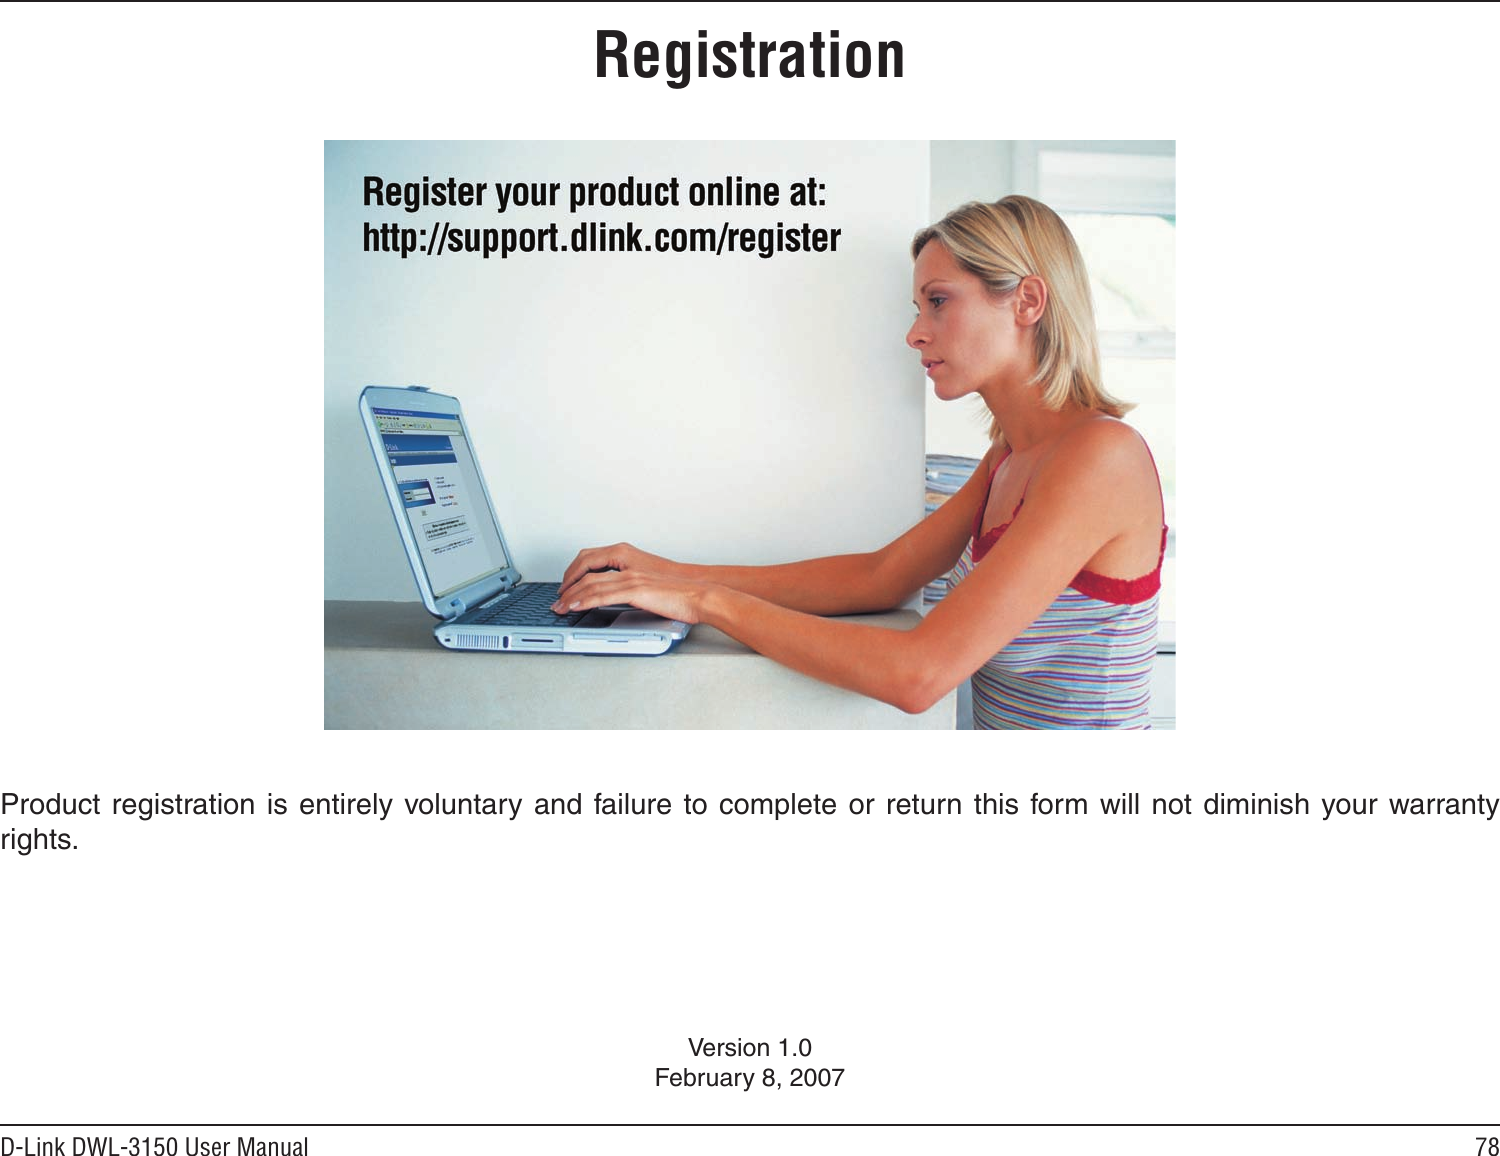 78D-Link DWL-3150 User ManualVersion 1.0February 8, 2007Product registration is entirely voluntary  and failure to complete or  return this  form will not diminish your warranty rights.Registration